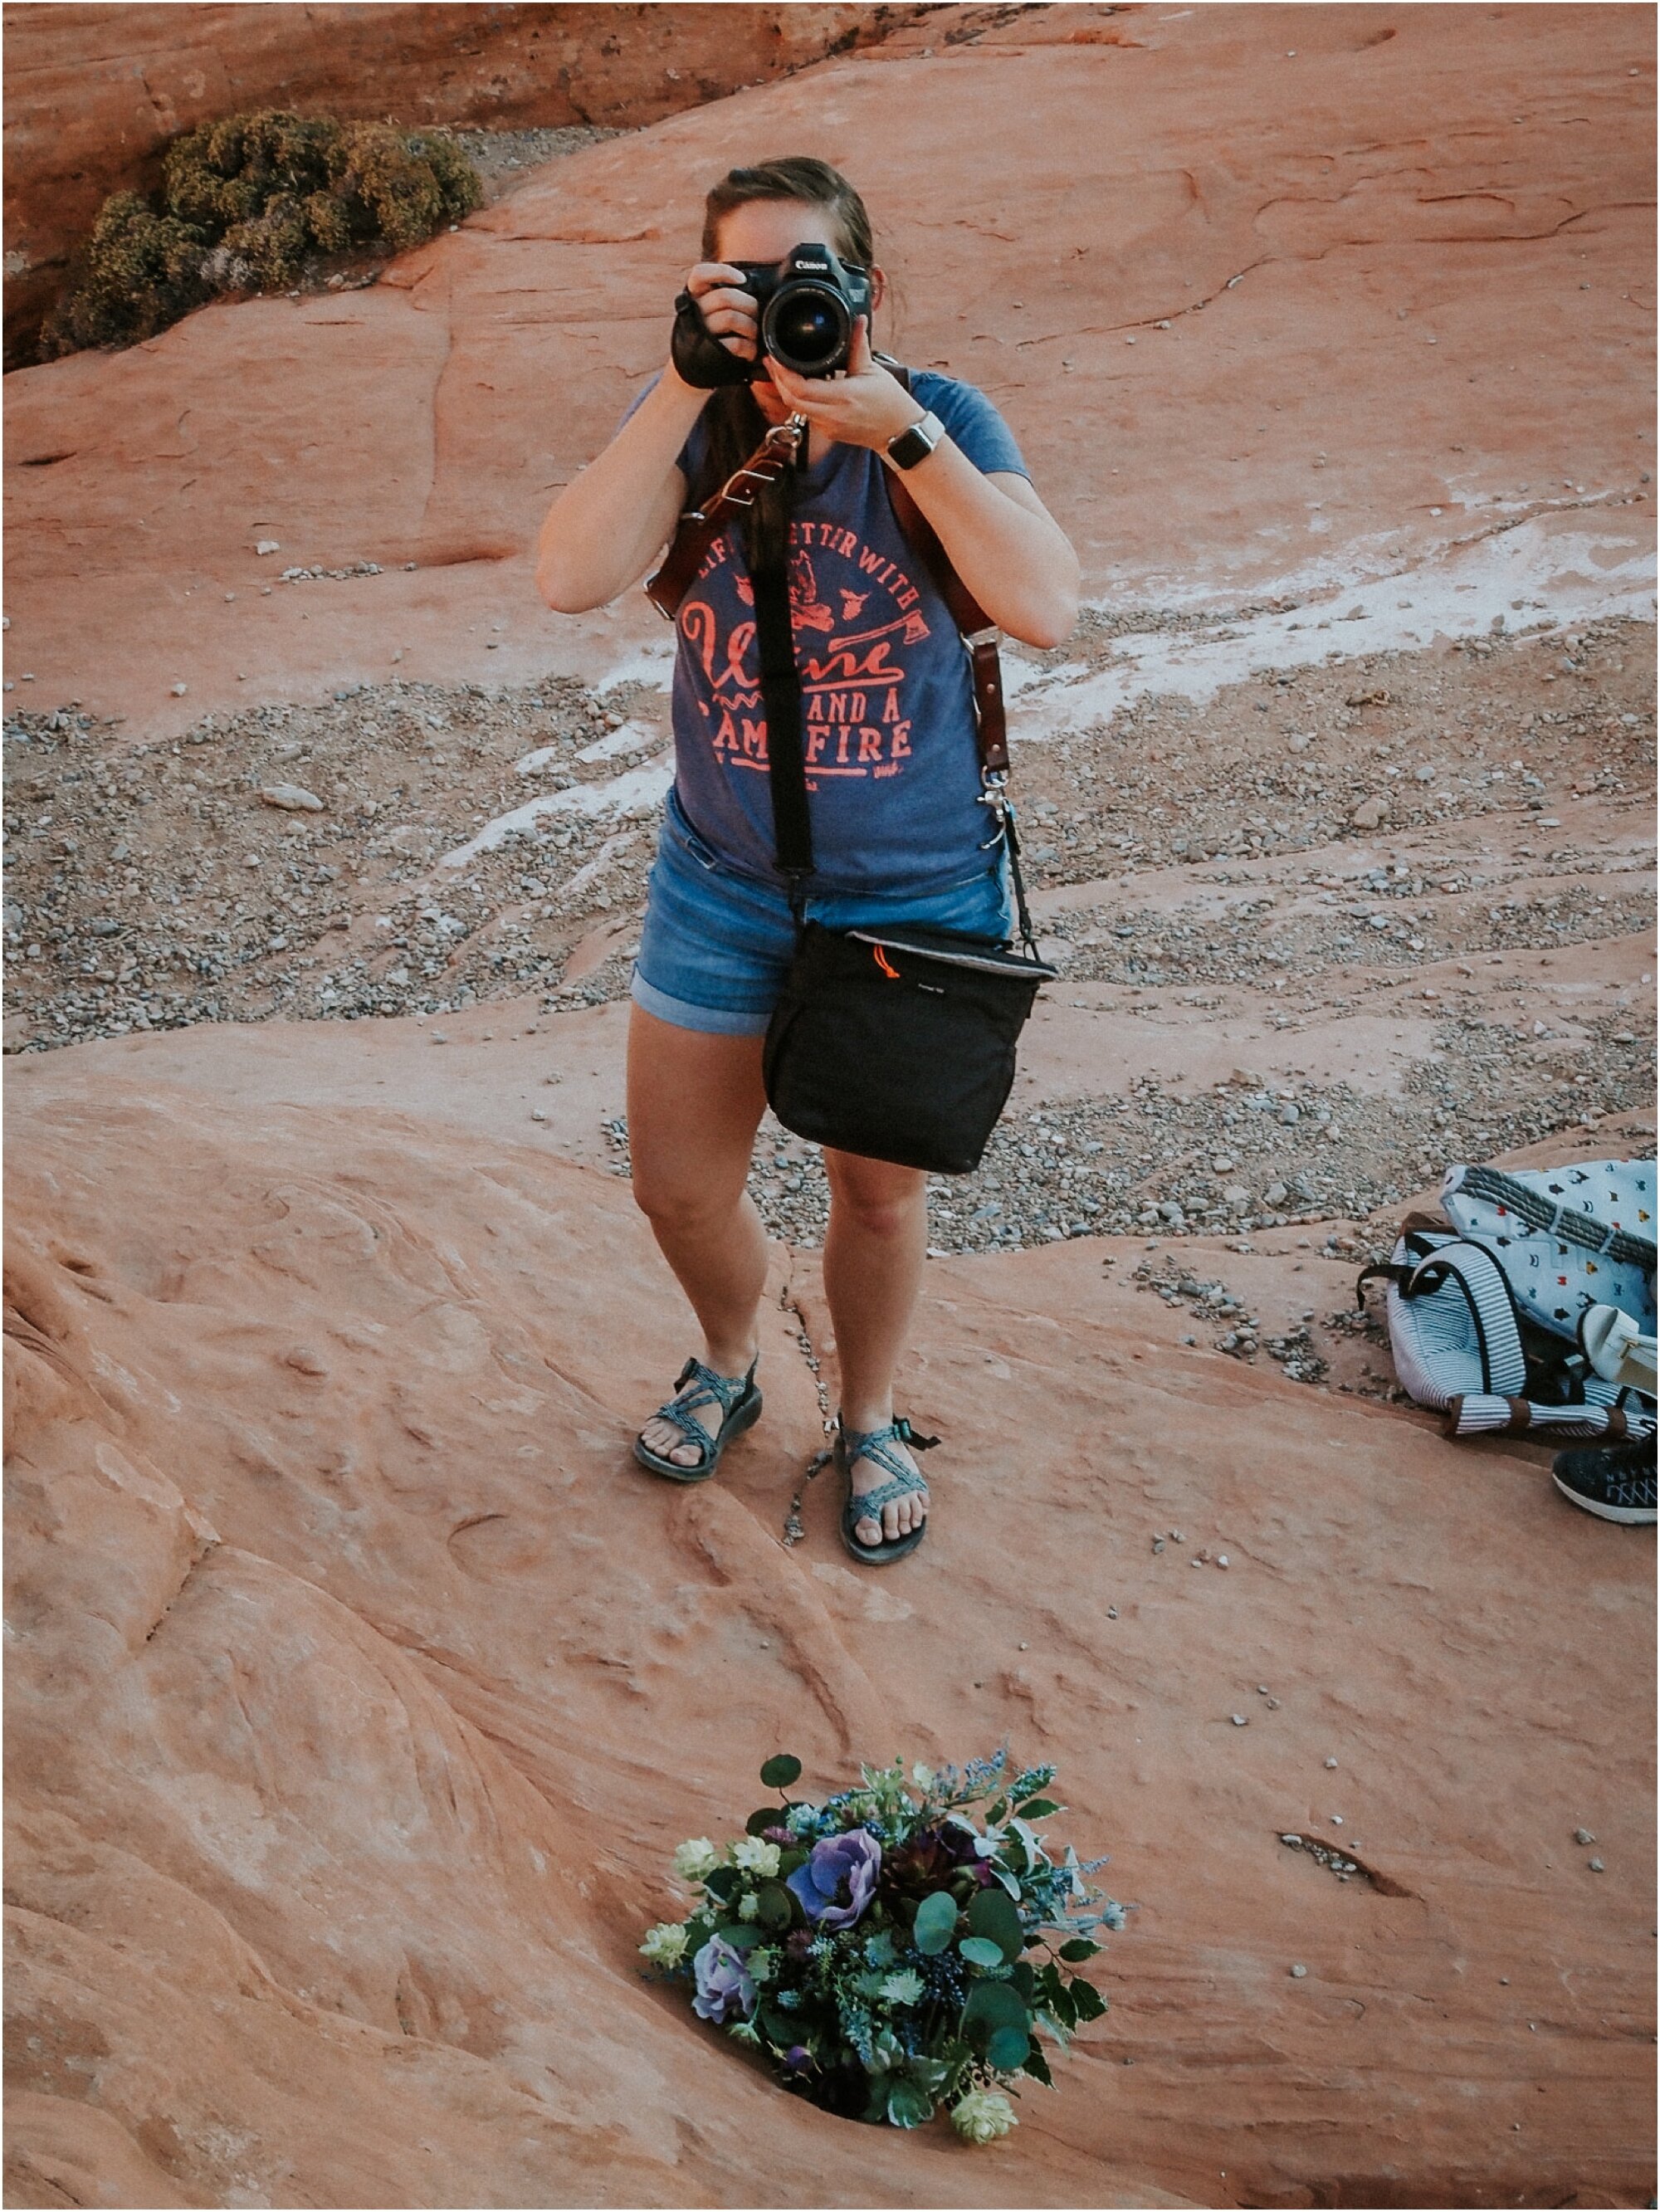   Including a shot of me, taking a picture of her!   Photo: Elizabeth Patterson  